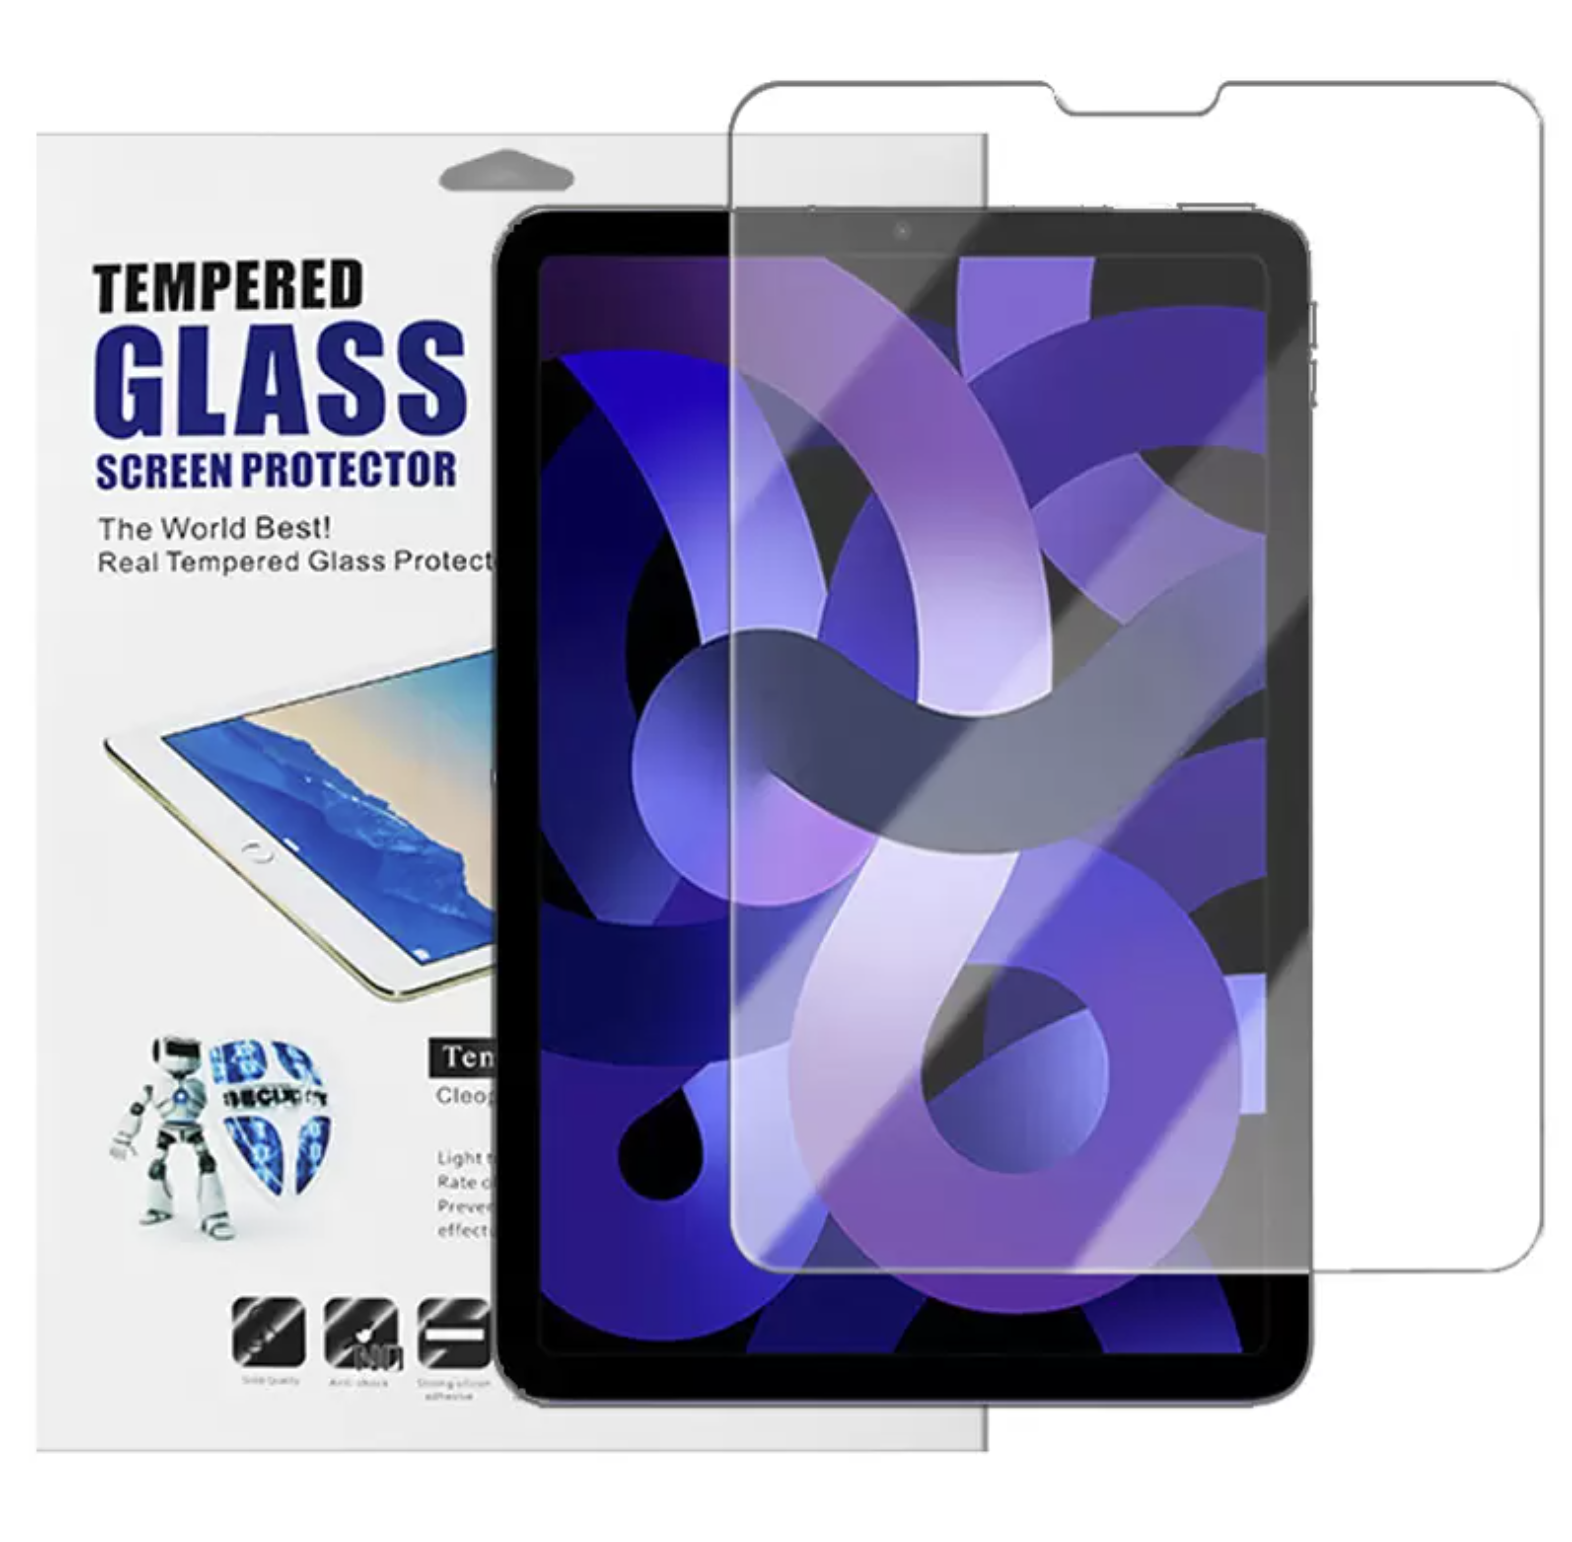 Premium 9H Temepered Glass Protector For Ipad 7th/ 9th Gen 10.2